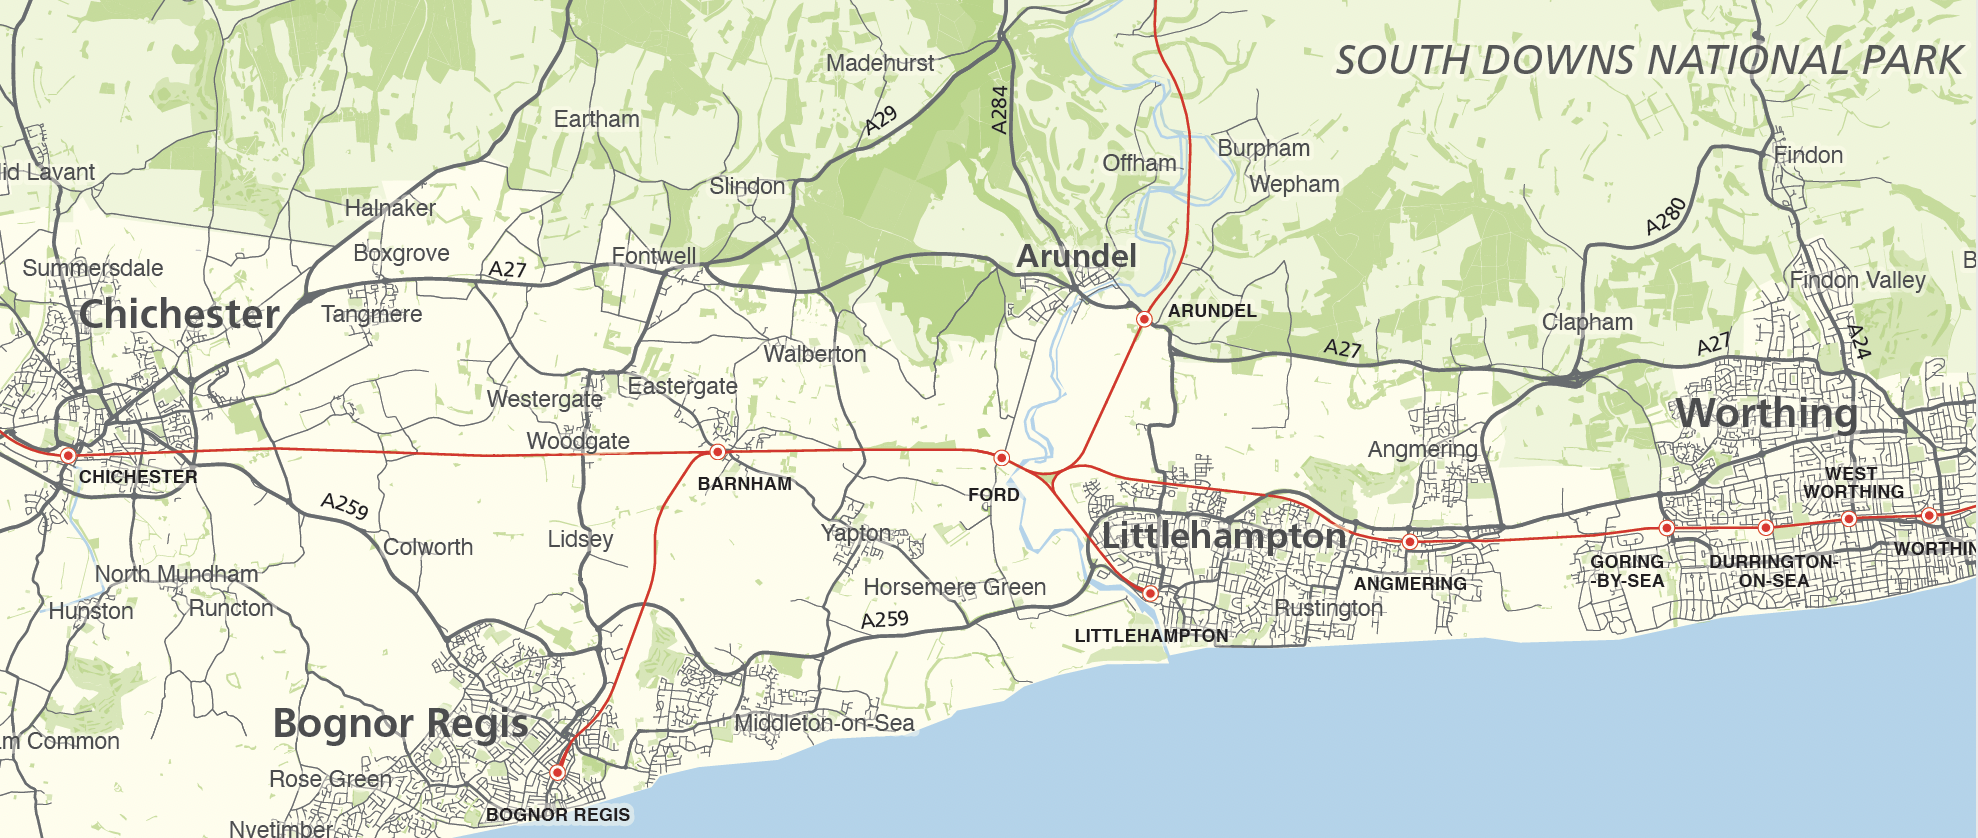 Detail from West Sussex county map